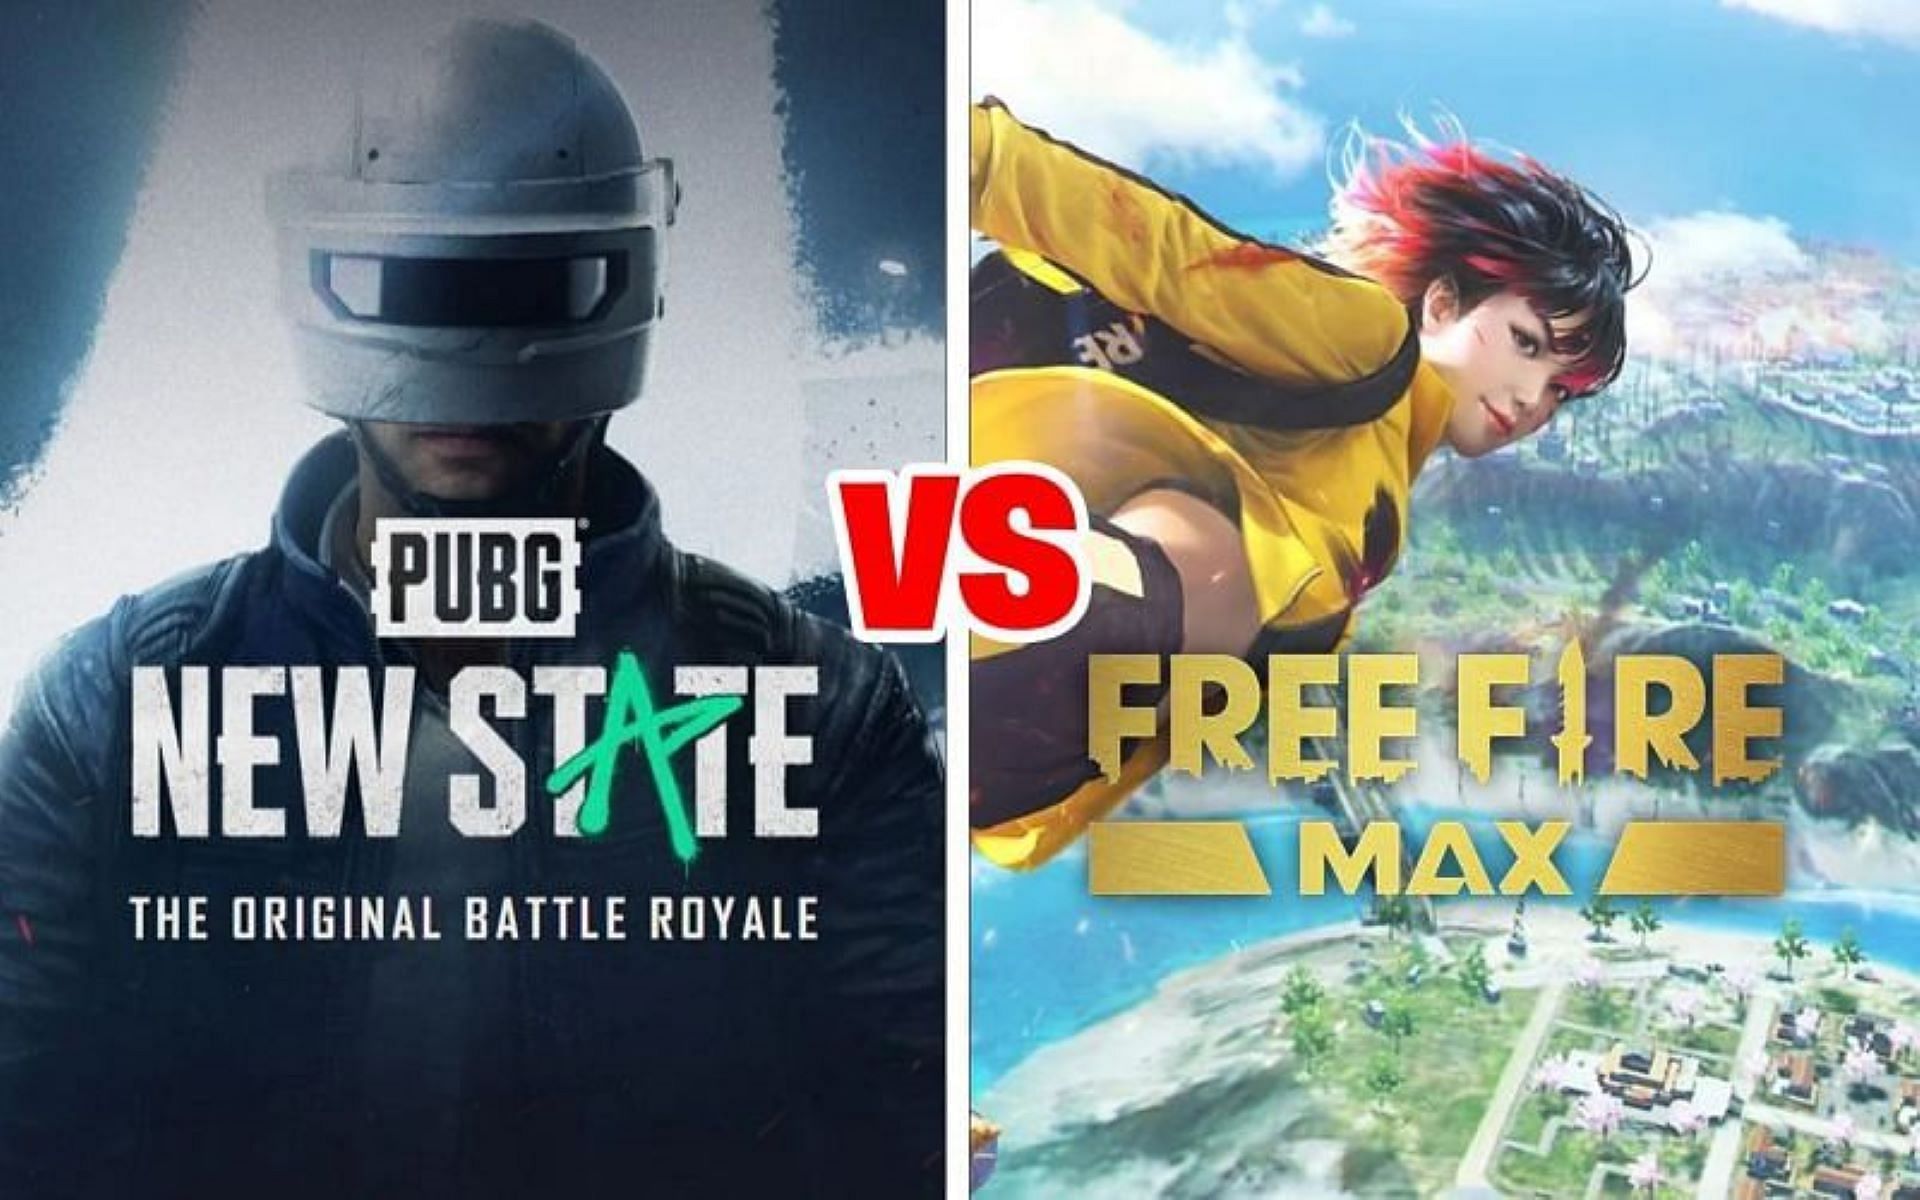 5 reasons why PUBG New State is better than Free Fire MAX (Image via Sportskeeda)